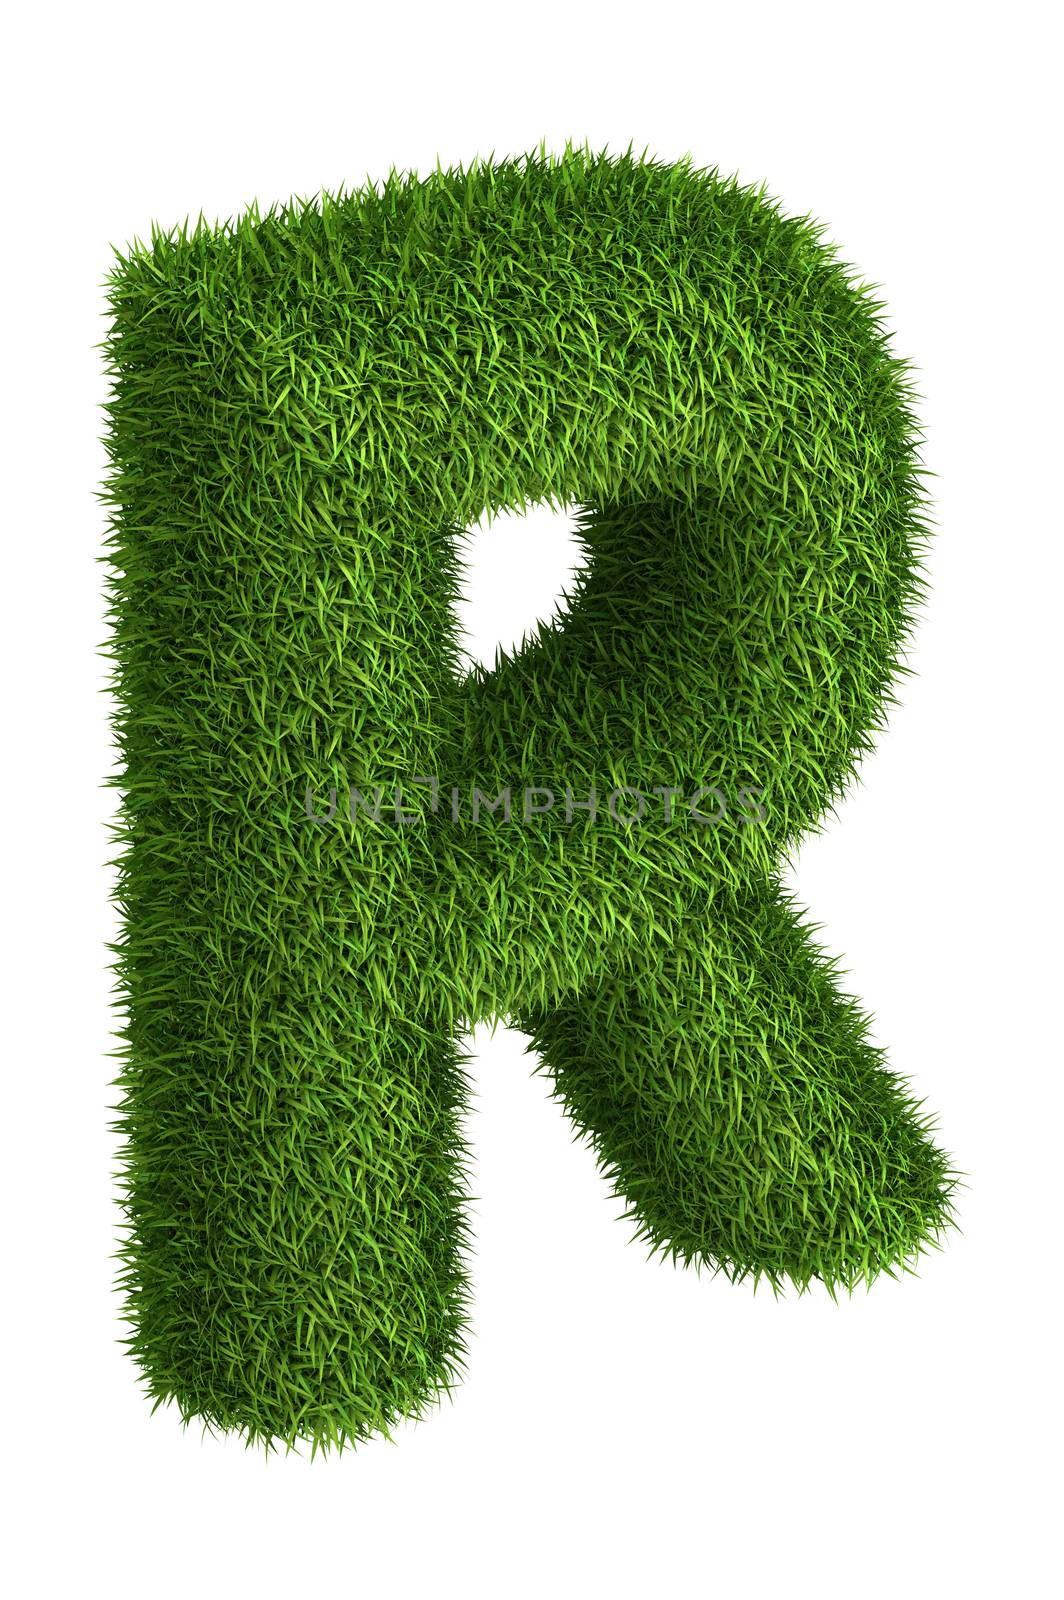 Natural grass letter R by iunewind